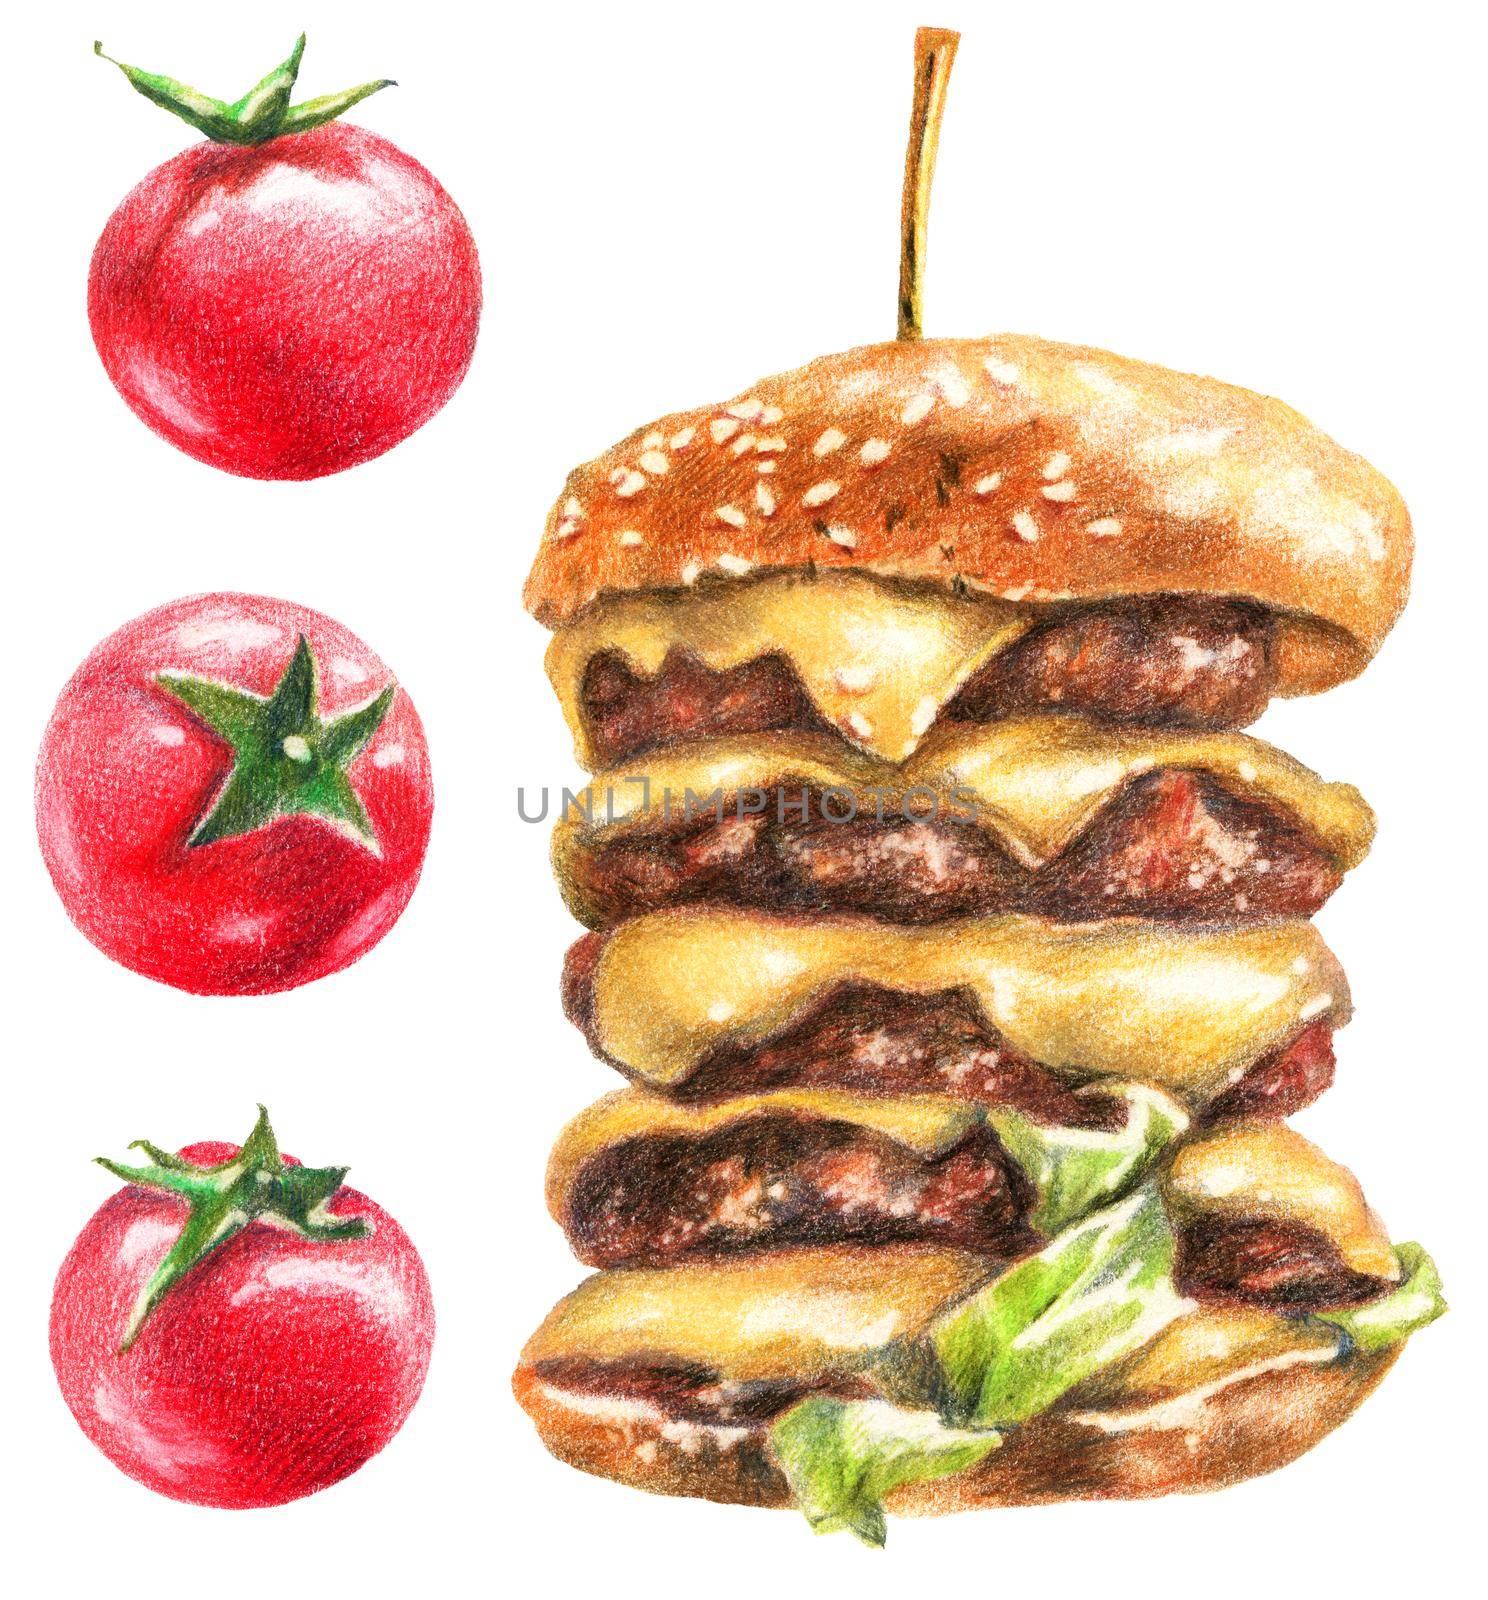 Color pencils realistic food illustration of burger and cherry tomatoes. Hand-drawn objects on white background.